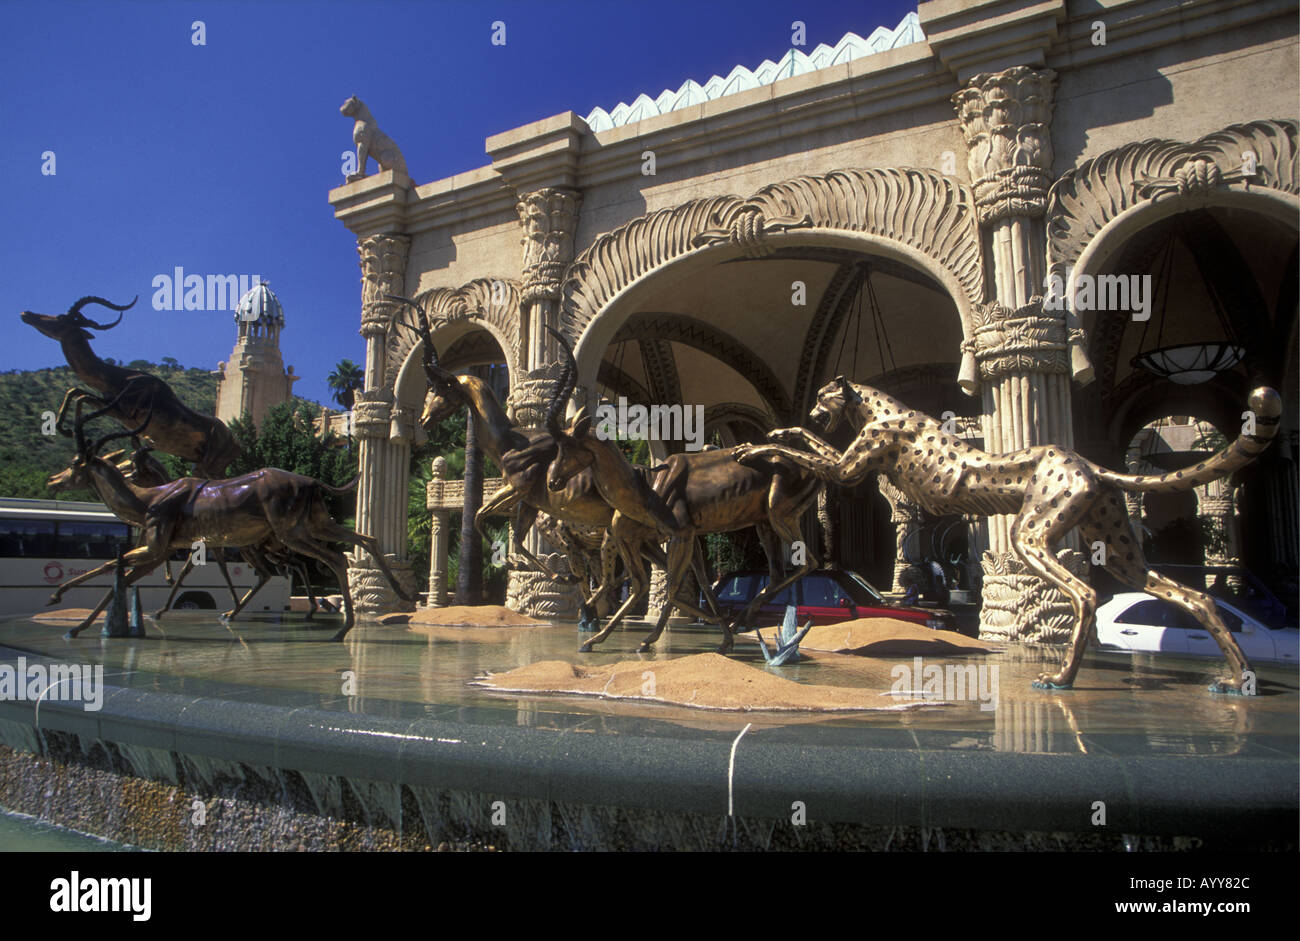 Statues of African wild animals at the Lost City complex Sun City South Africa Stock Photo